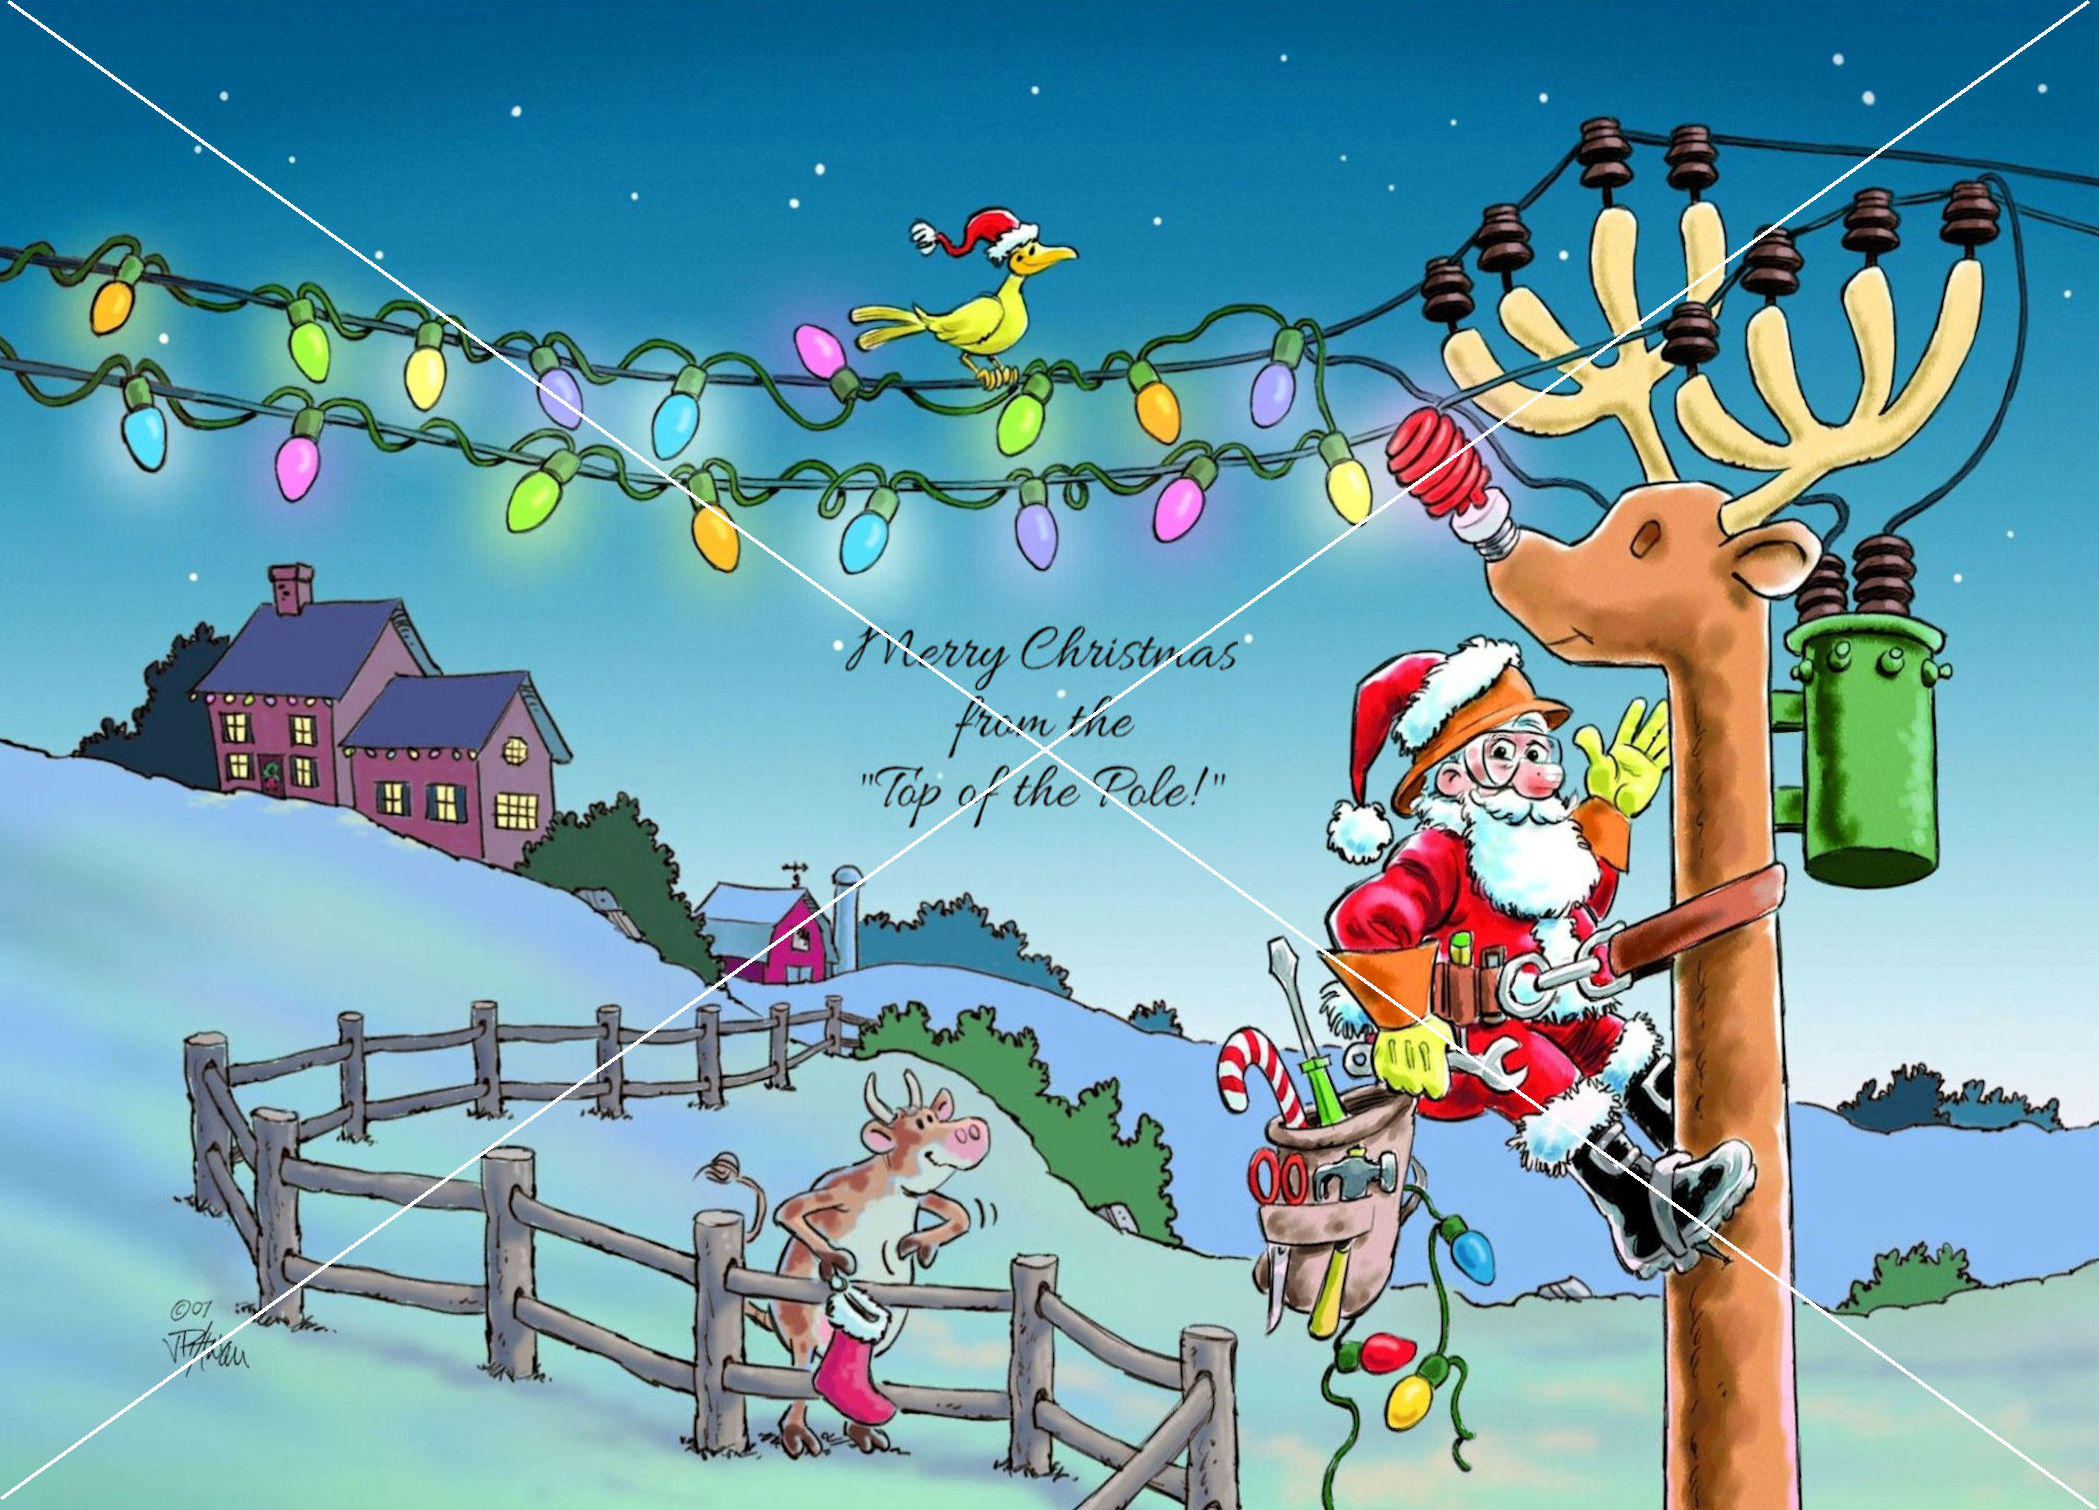 RUDY TRANSFORMED CHRISTMAS HOLIDAY GREETING CARDS electrical utilities, cooperatives